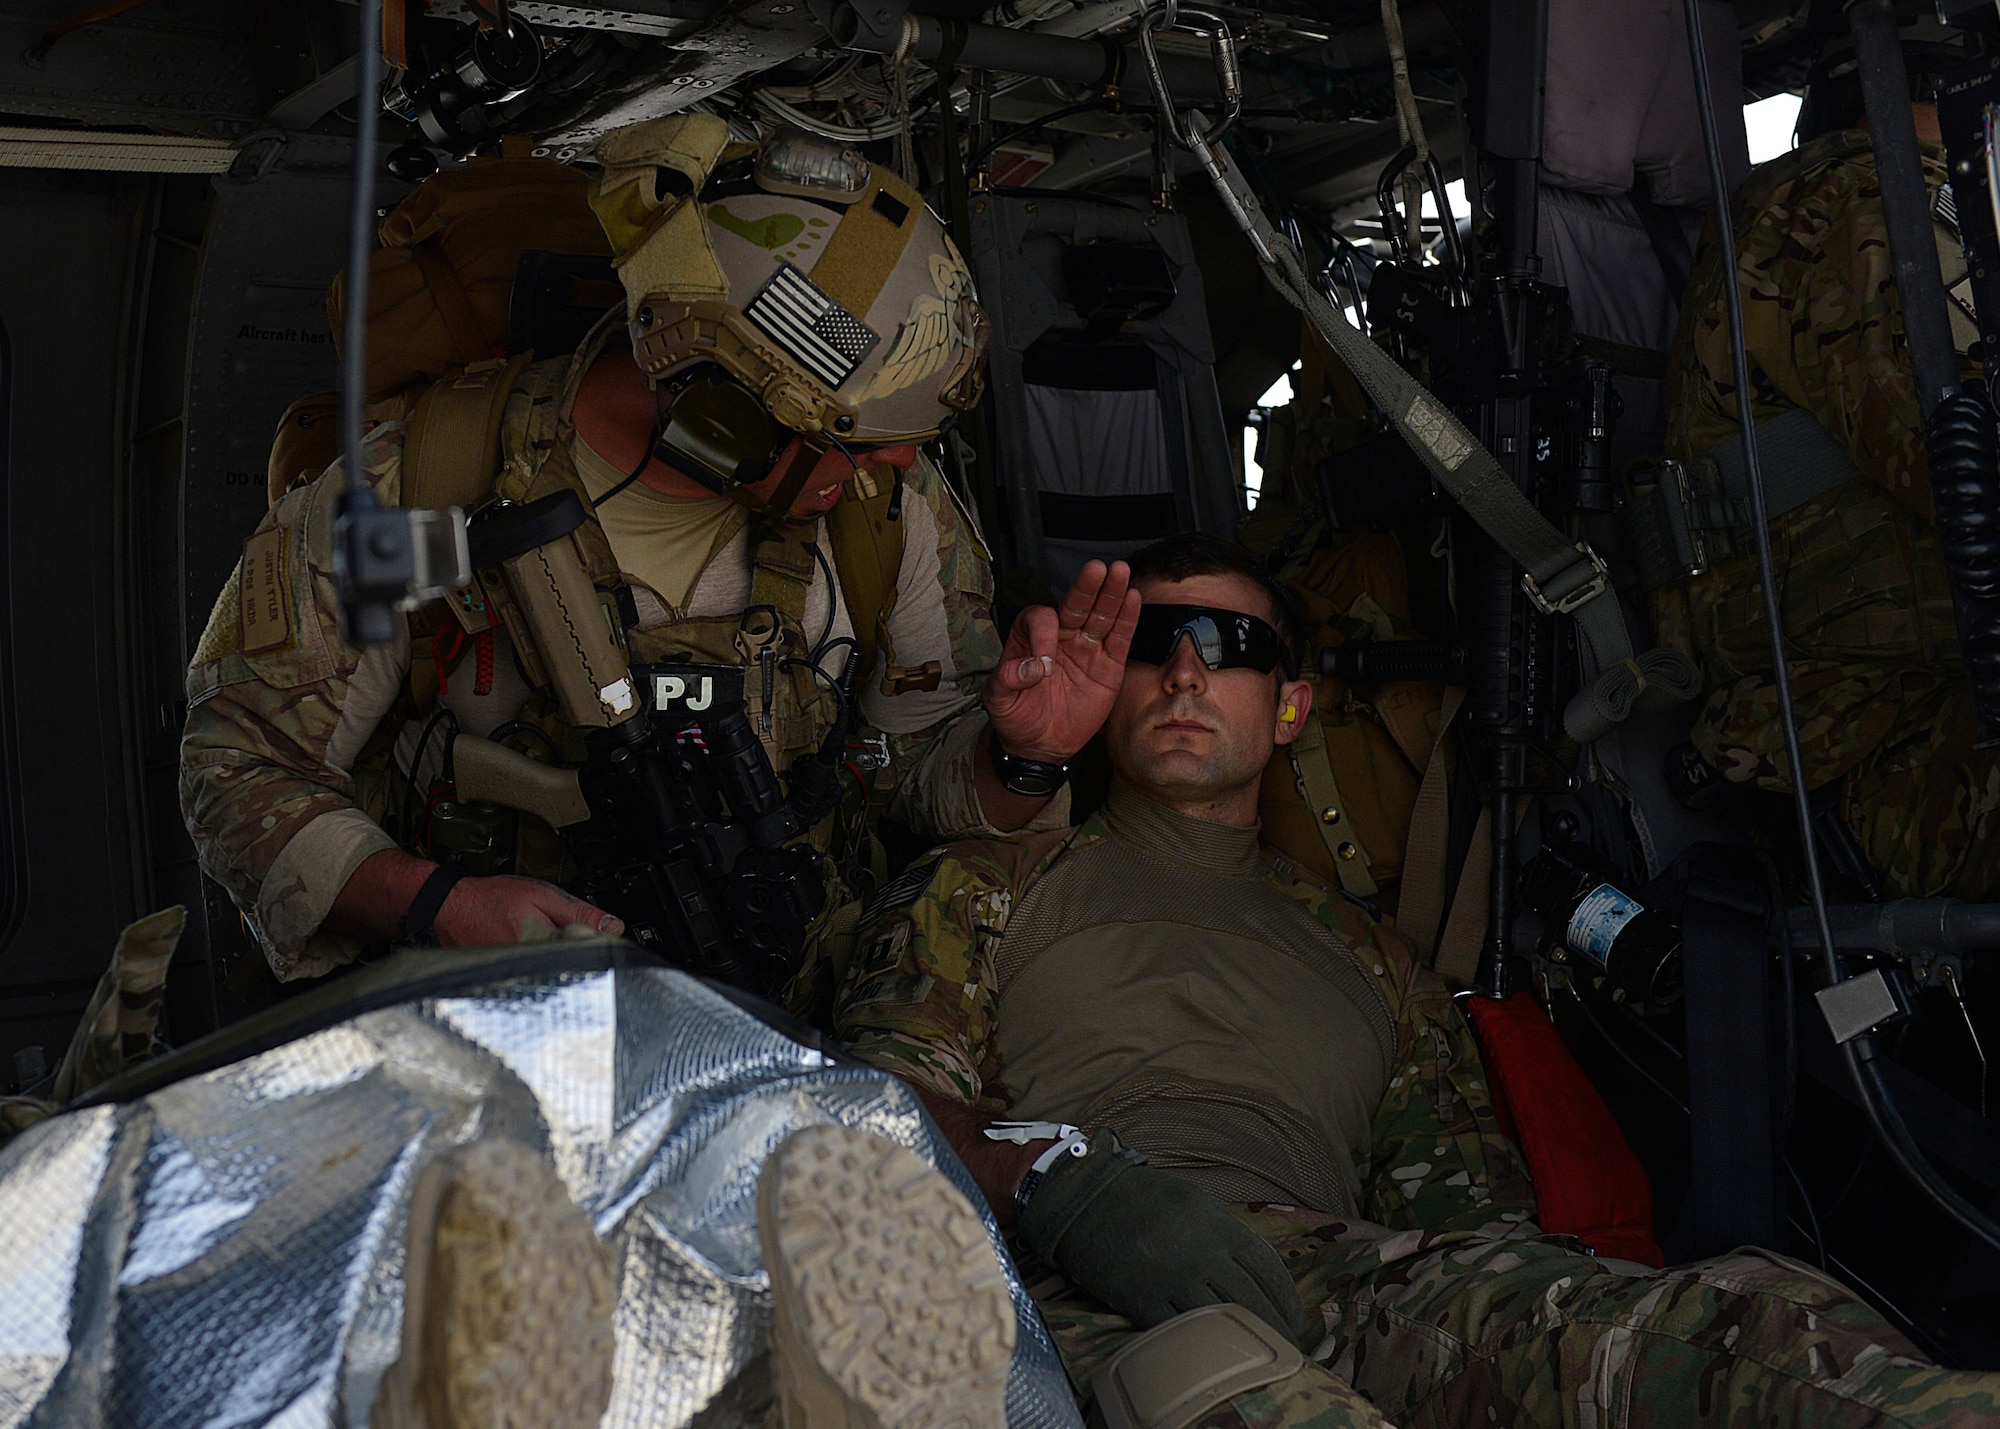 U.S. Air Force Staff Sgt. Justin Tyler, 83rd Expeditionary Rescue Squadron, 455 Air Expeditionary Wing pararescue element leader, treats a simulated casualty in a HH-60G Pave Hawk helicopter at Bagram Airfield, Afghanistan May 5, 2014.  The squadron participated in a training scenario where a vehicle simulated striking an Improvised Explosive Device.  During the training, rescue crews flew on HH-60G Pave Hawks to the simulated point of injury, provided security, treated patients, prepared them for travel, and safely departed the area.  Tyler is a native of Columbia, S.C. and is deployed from Moody Air Force Base, Ga. (U.S. Air Force photo by Staff Sgt. Evelyn Chavez/Released)